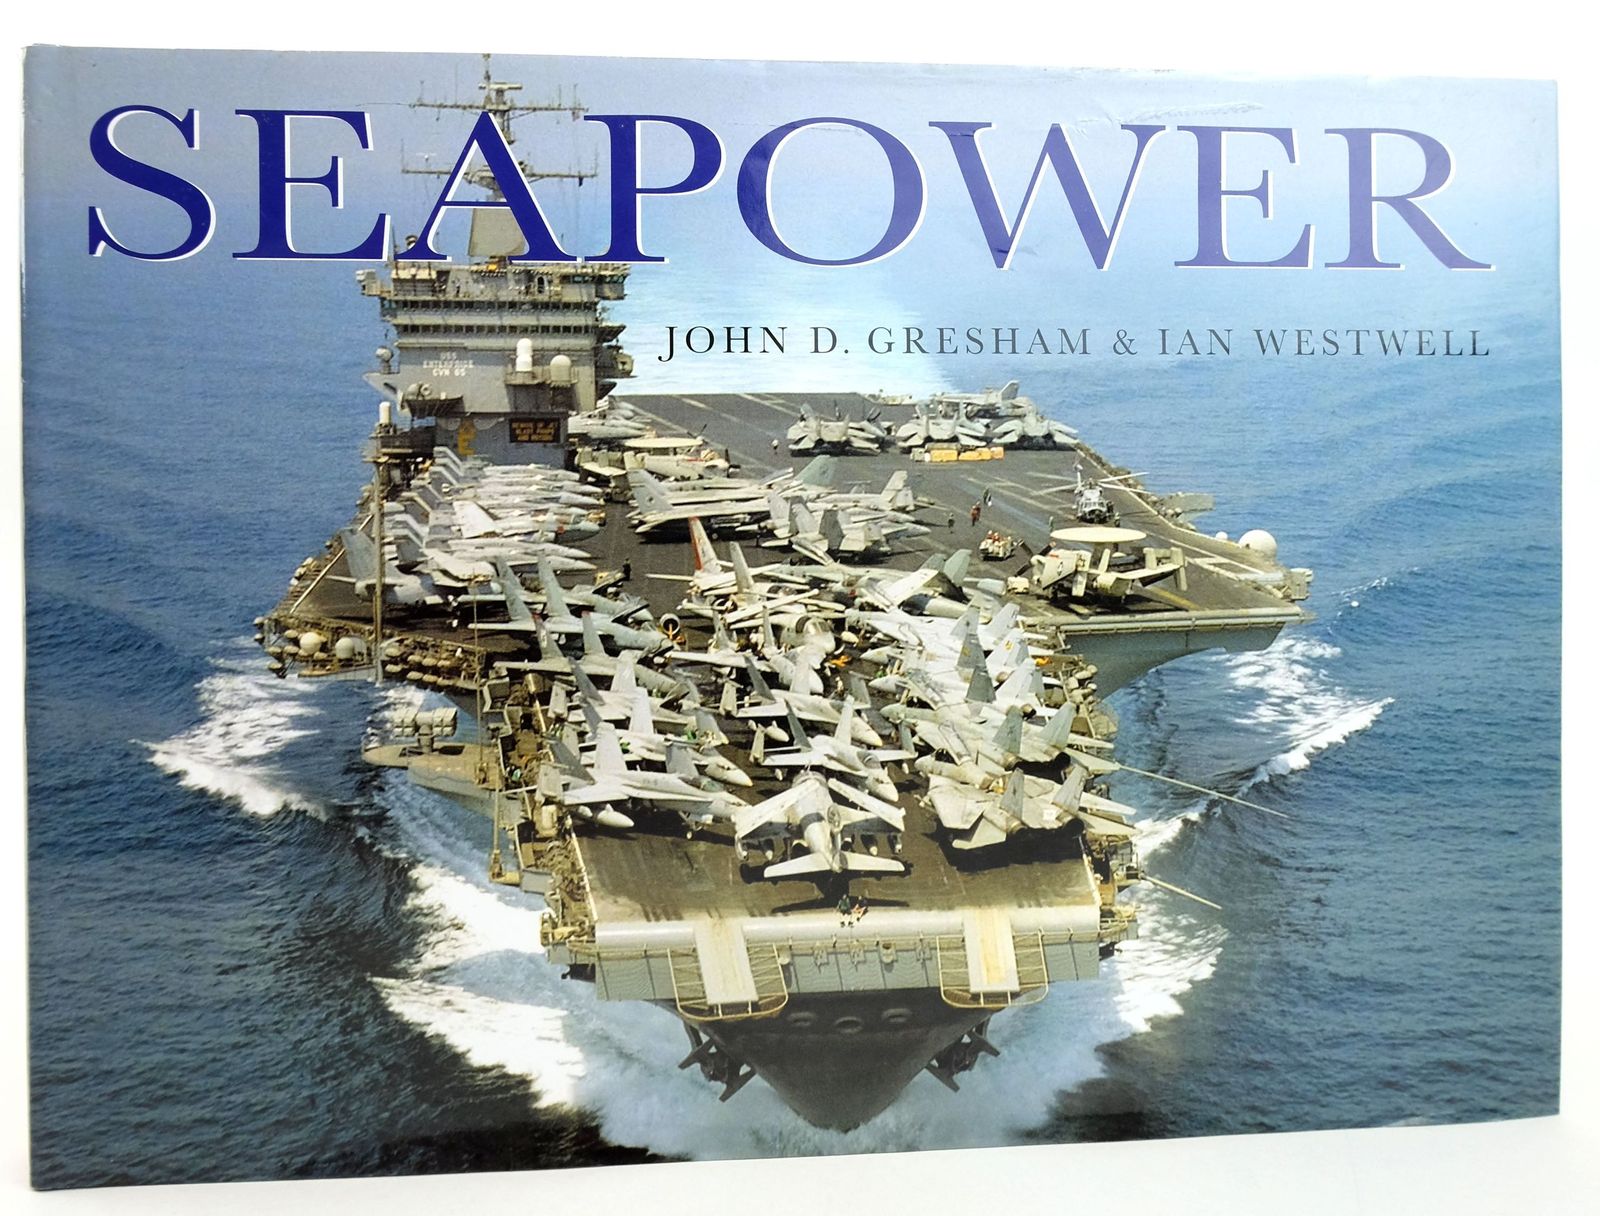 Photo of SEAPOWER written by Gresham, John Westwell, Ian published by Chartwell Books Inc. (STOCK CODE: 1820074)  for sale by Stella & Rose's Books